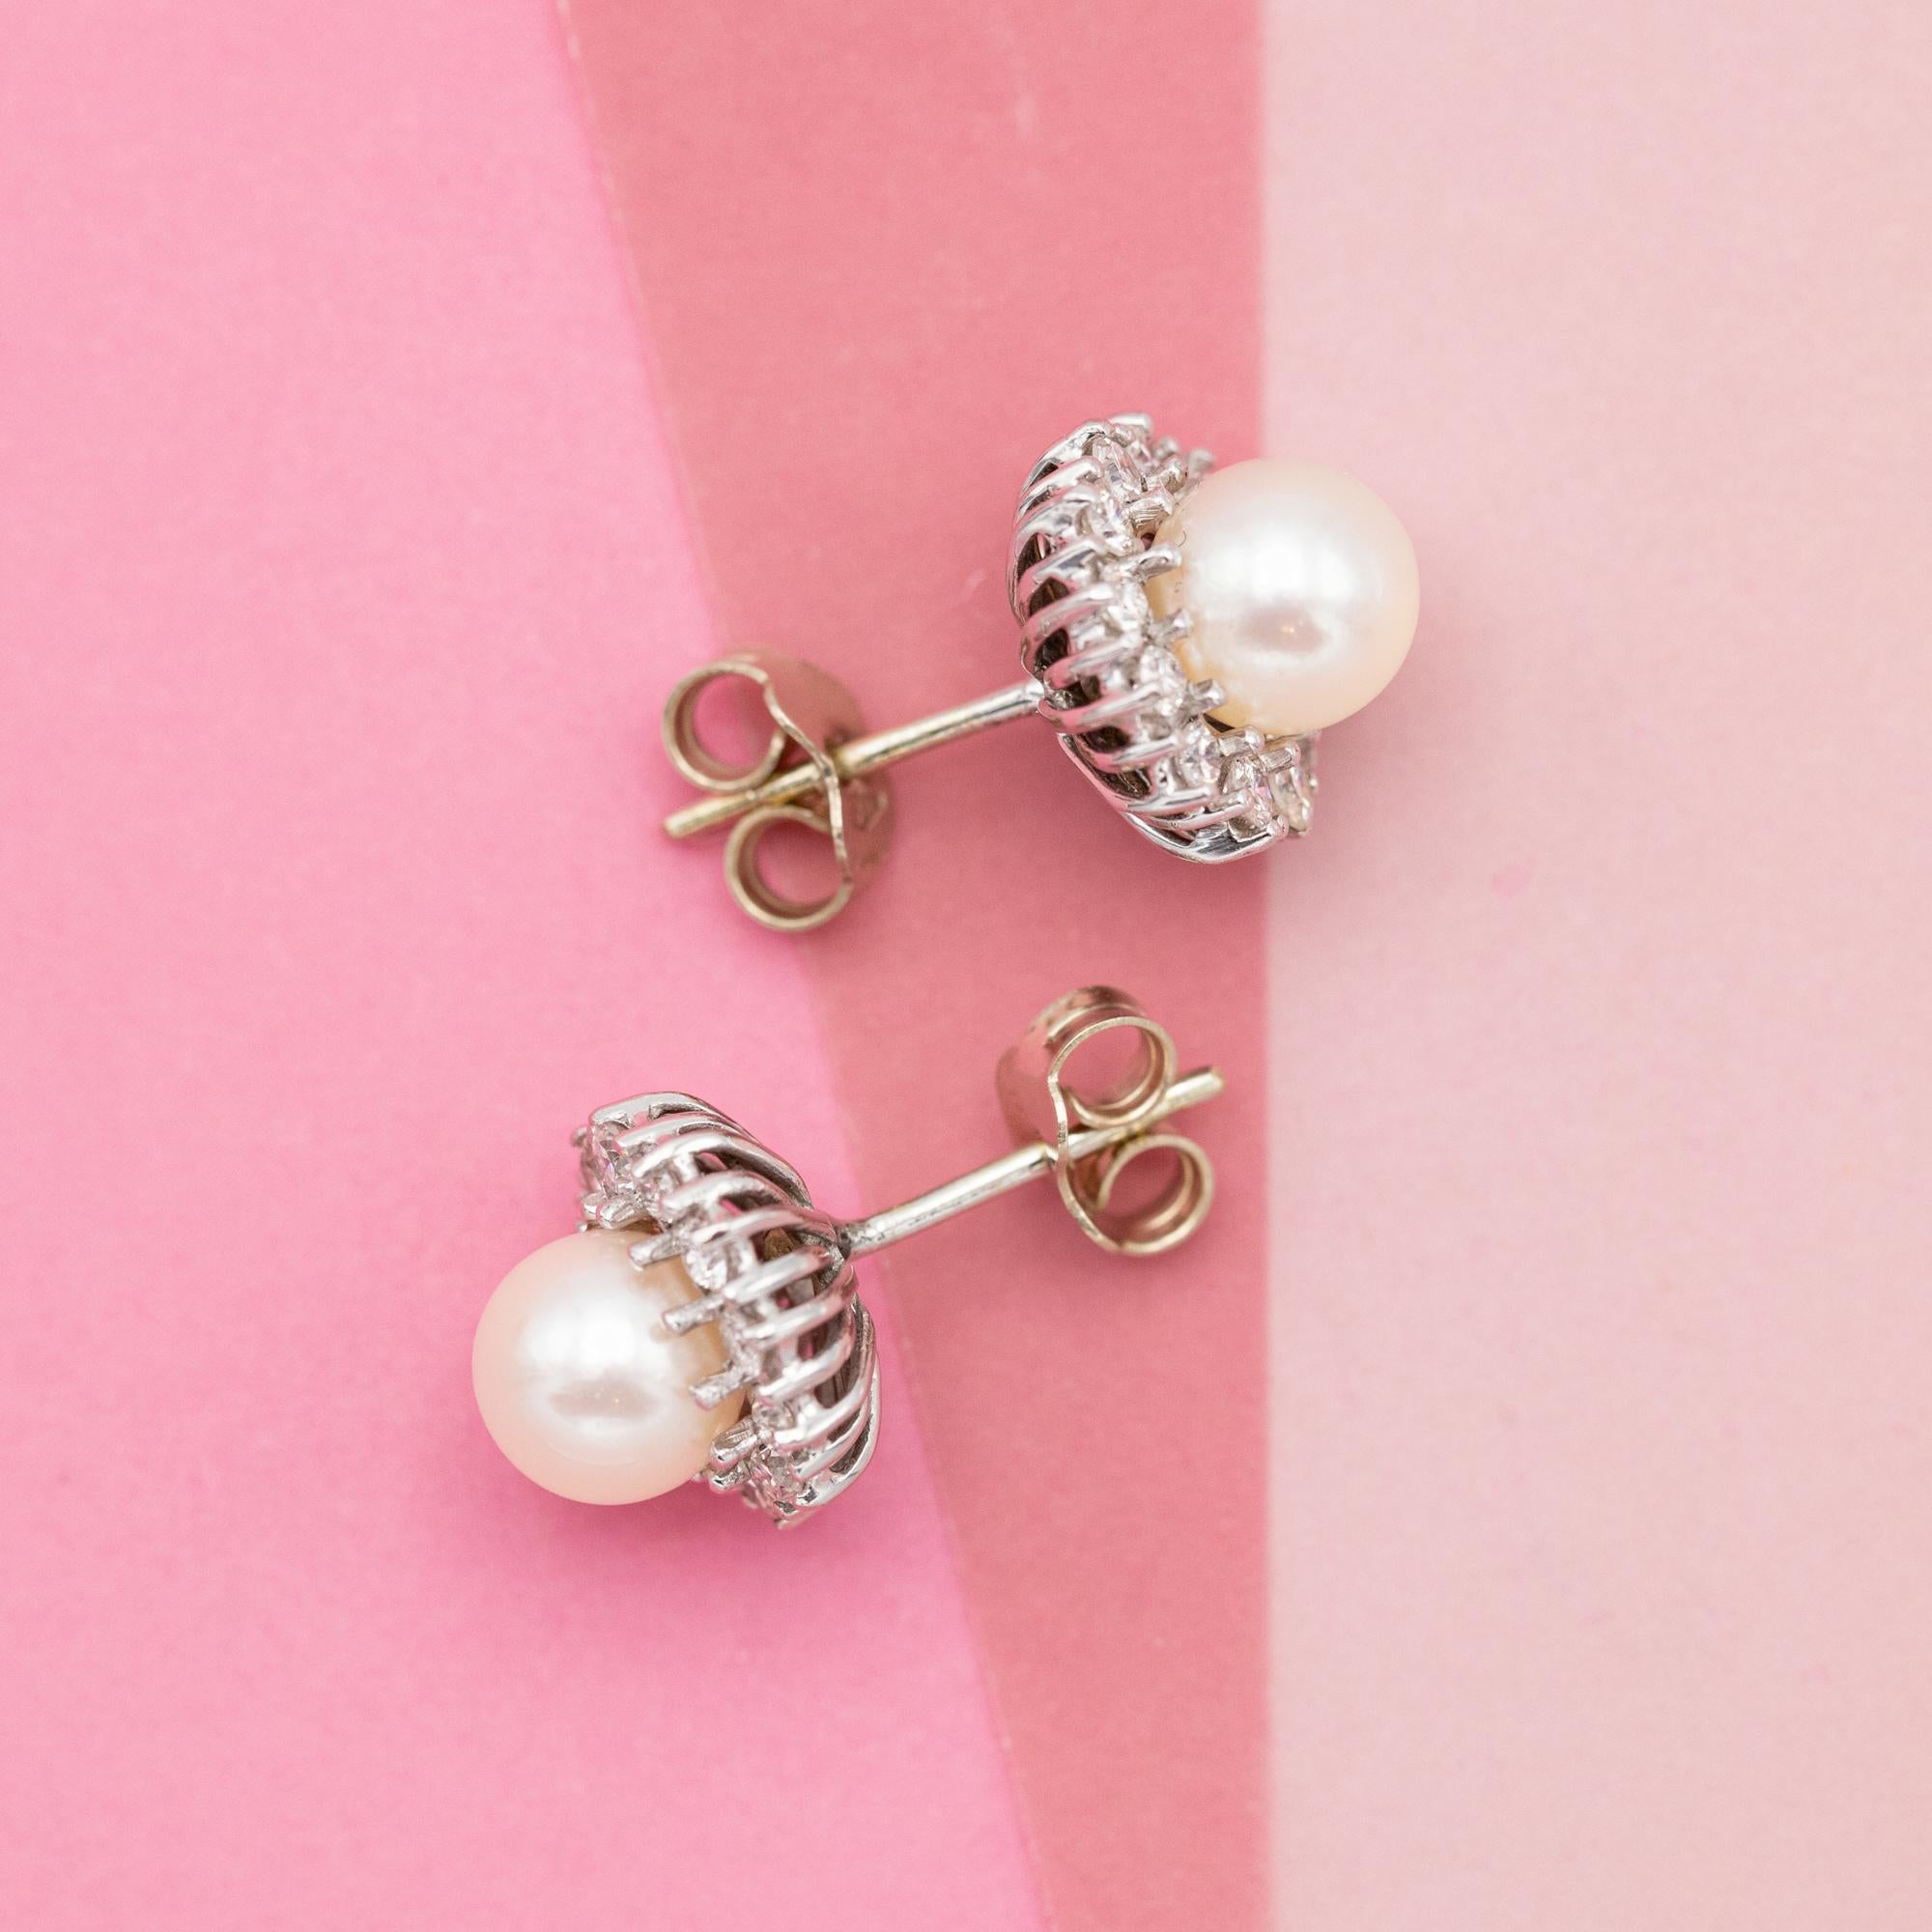 Brilliant Cut 18K gold earrings - Small floral diamond and pearl cluster studs - 0.6 ct For Sale